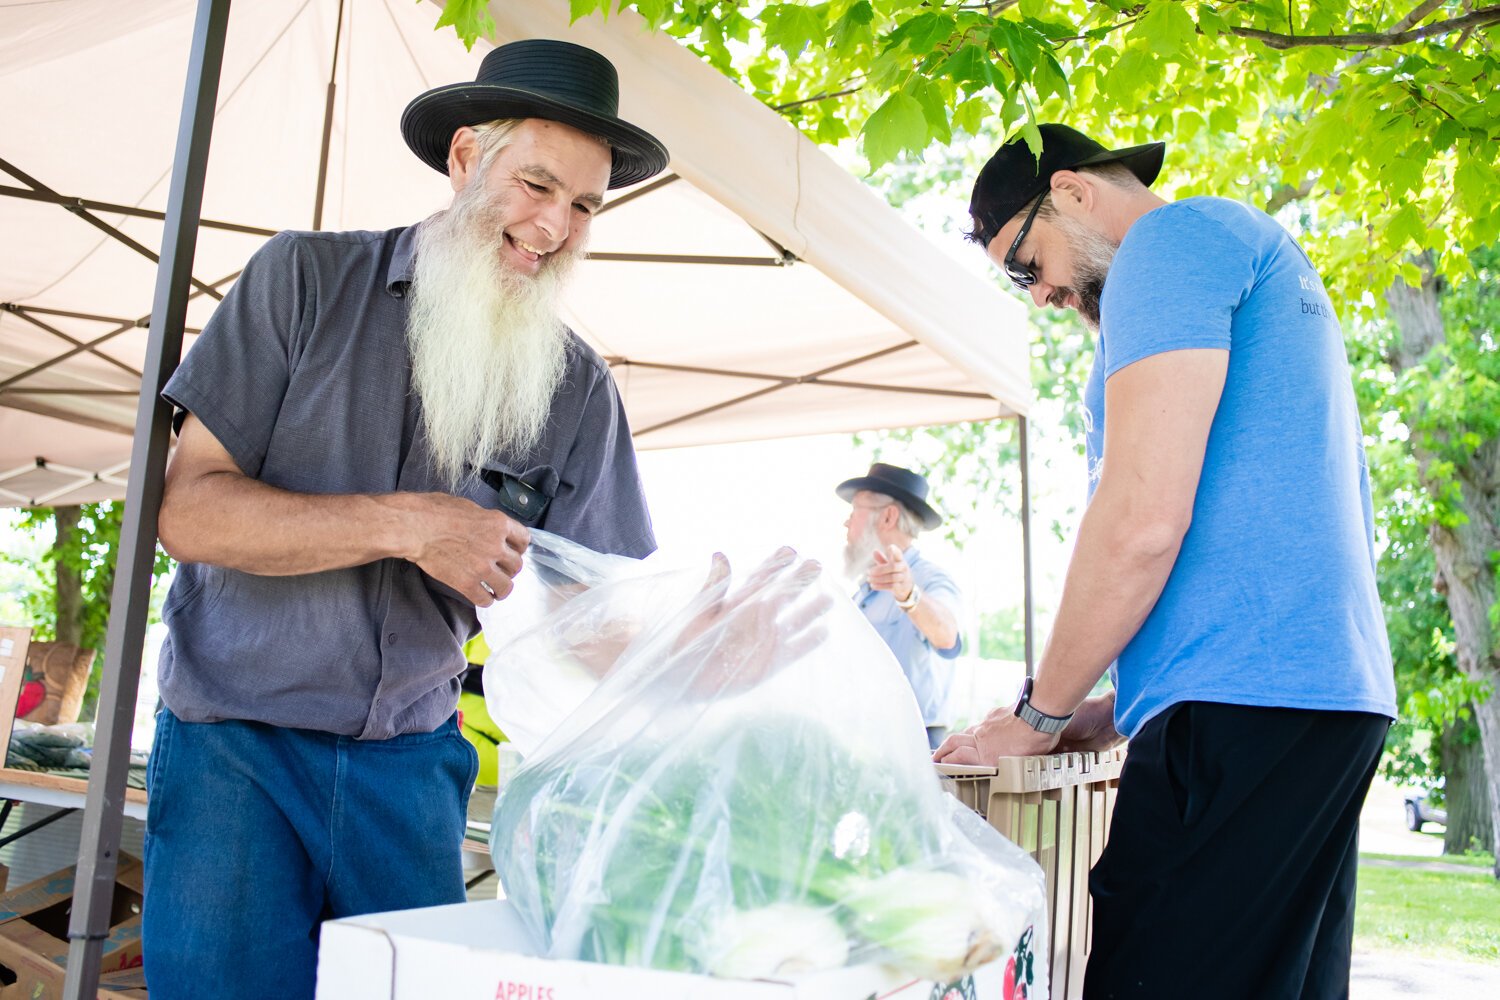 Myron Metzger with Berry Hill Farm helps customer Aaron Butts, Chef at Copper Spoon, with his weekly order during the Fort Wayne's Farmers Market at McCulloch Park on Saturday June 19, 2021.